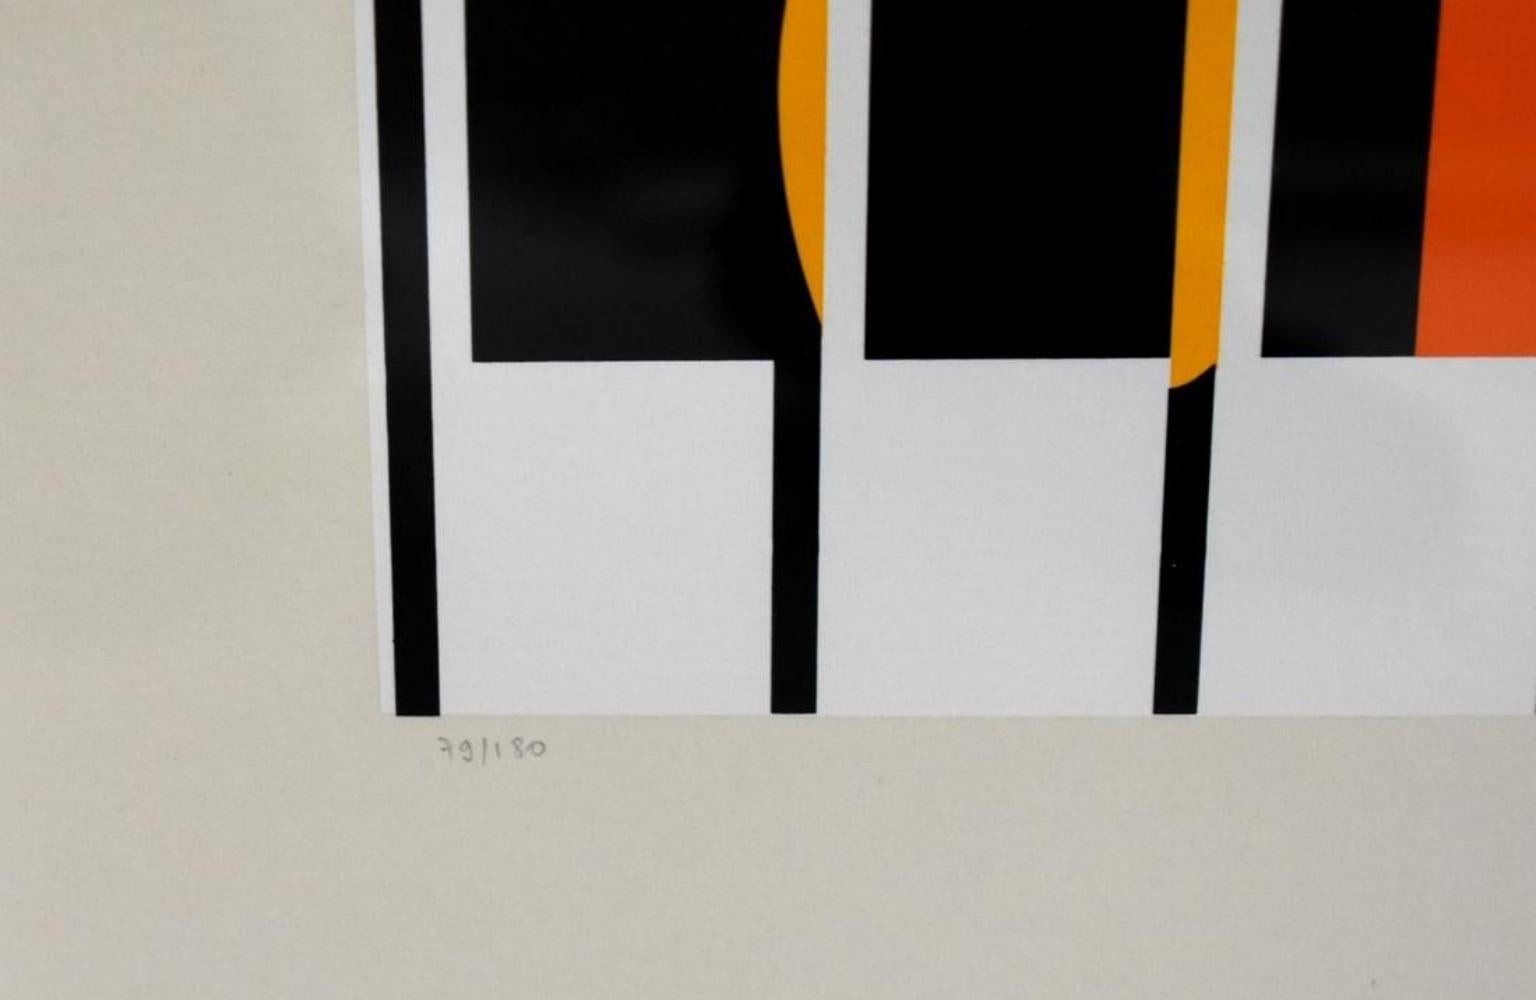 Yaacov Agam, Israeli (Born 1928) Color Lithograph, Agamograph Kinetic Op Art, Pencil Signed and Numbered 79/180 on Lower Margin. Margin to margin measures 17-3/4